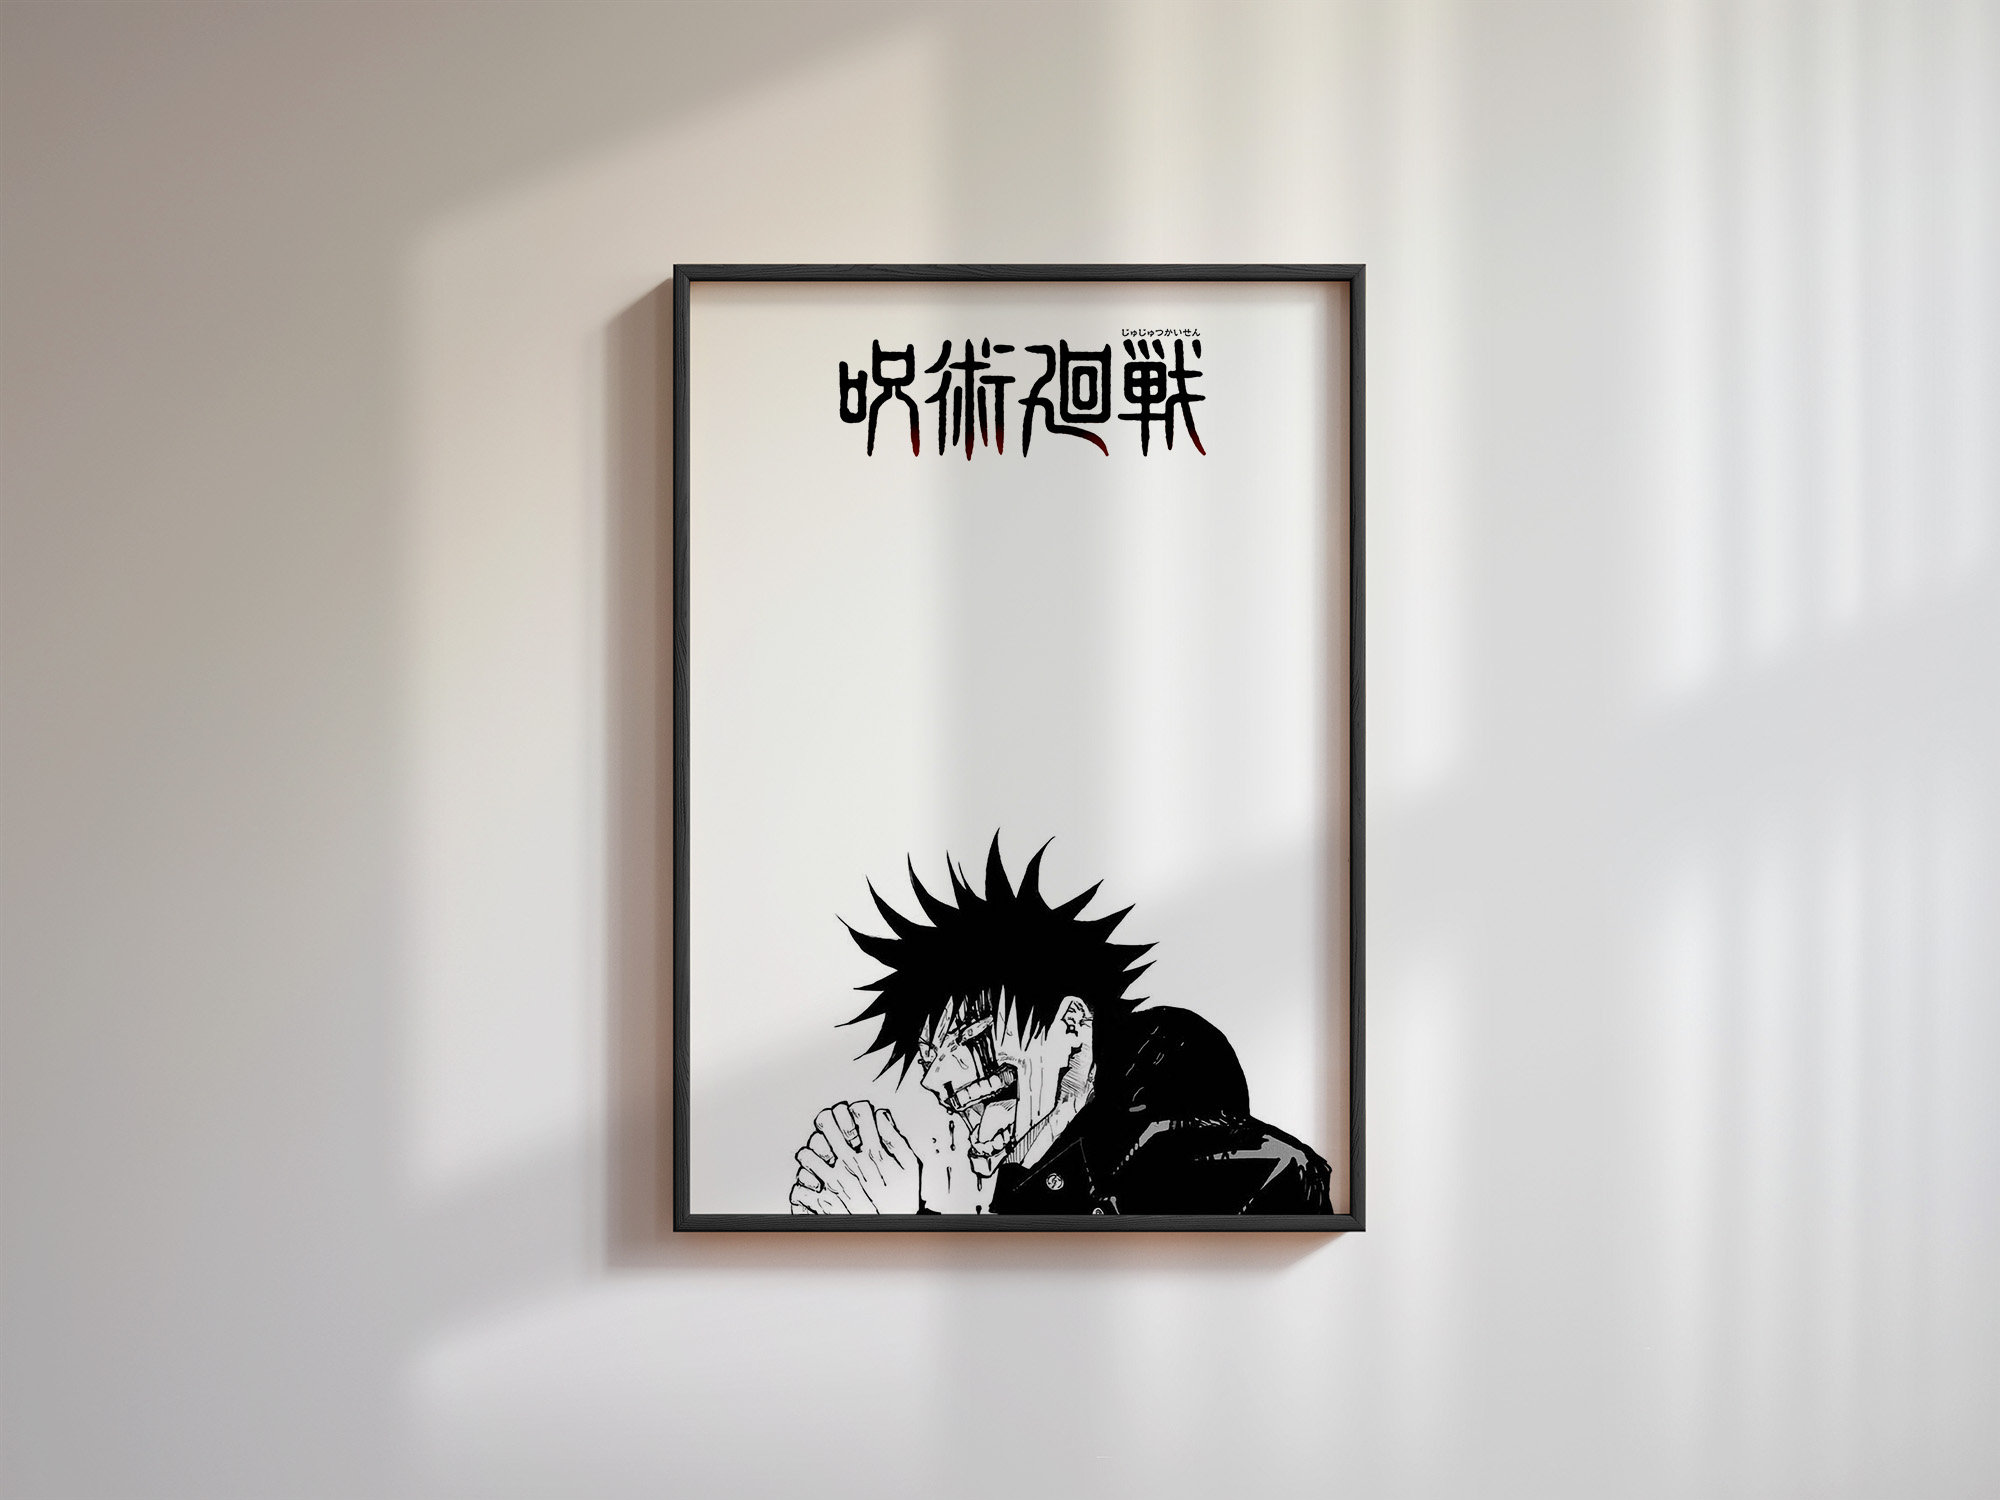  Fushiguro Megumi Poster Jujutsu Kaisen Posters Anime Wall Art  Canvas Japan Manga Personality Anime Decorative Painting for Room Aesthetic  Bedroom Wallpaper Wall Decor Fans Gifts 16 * 24 inch No Frame